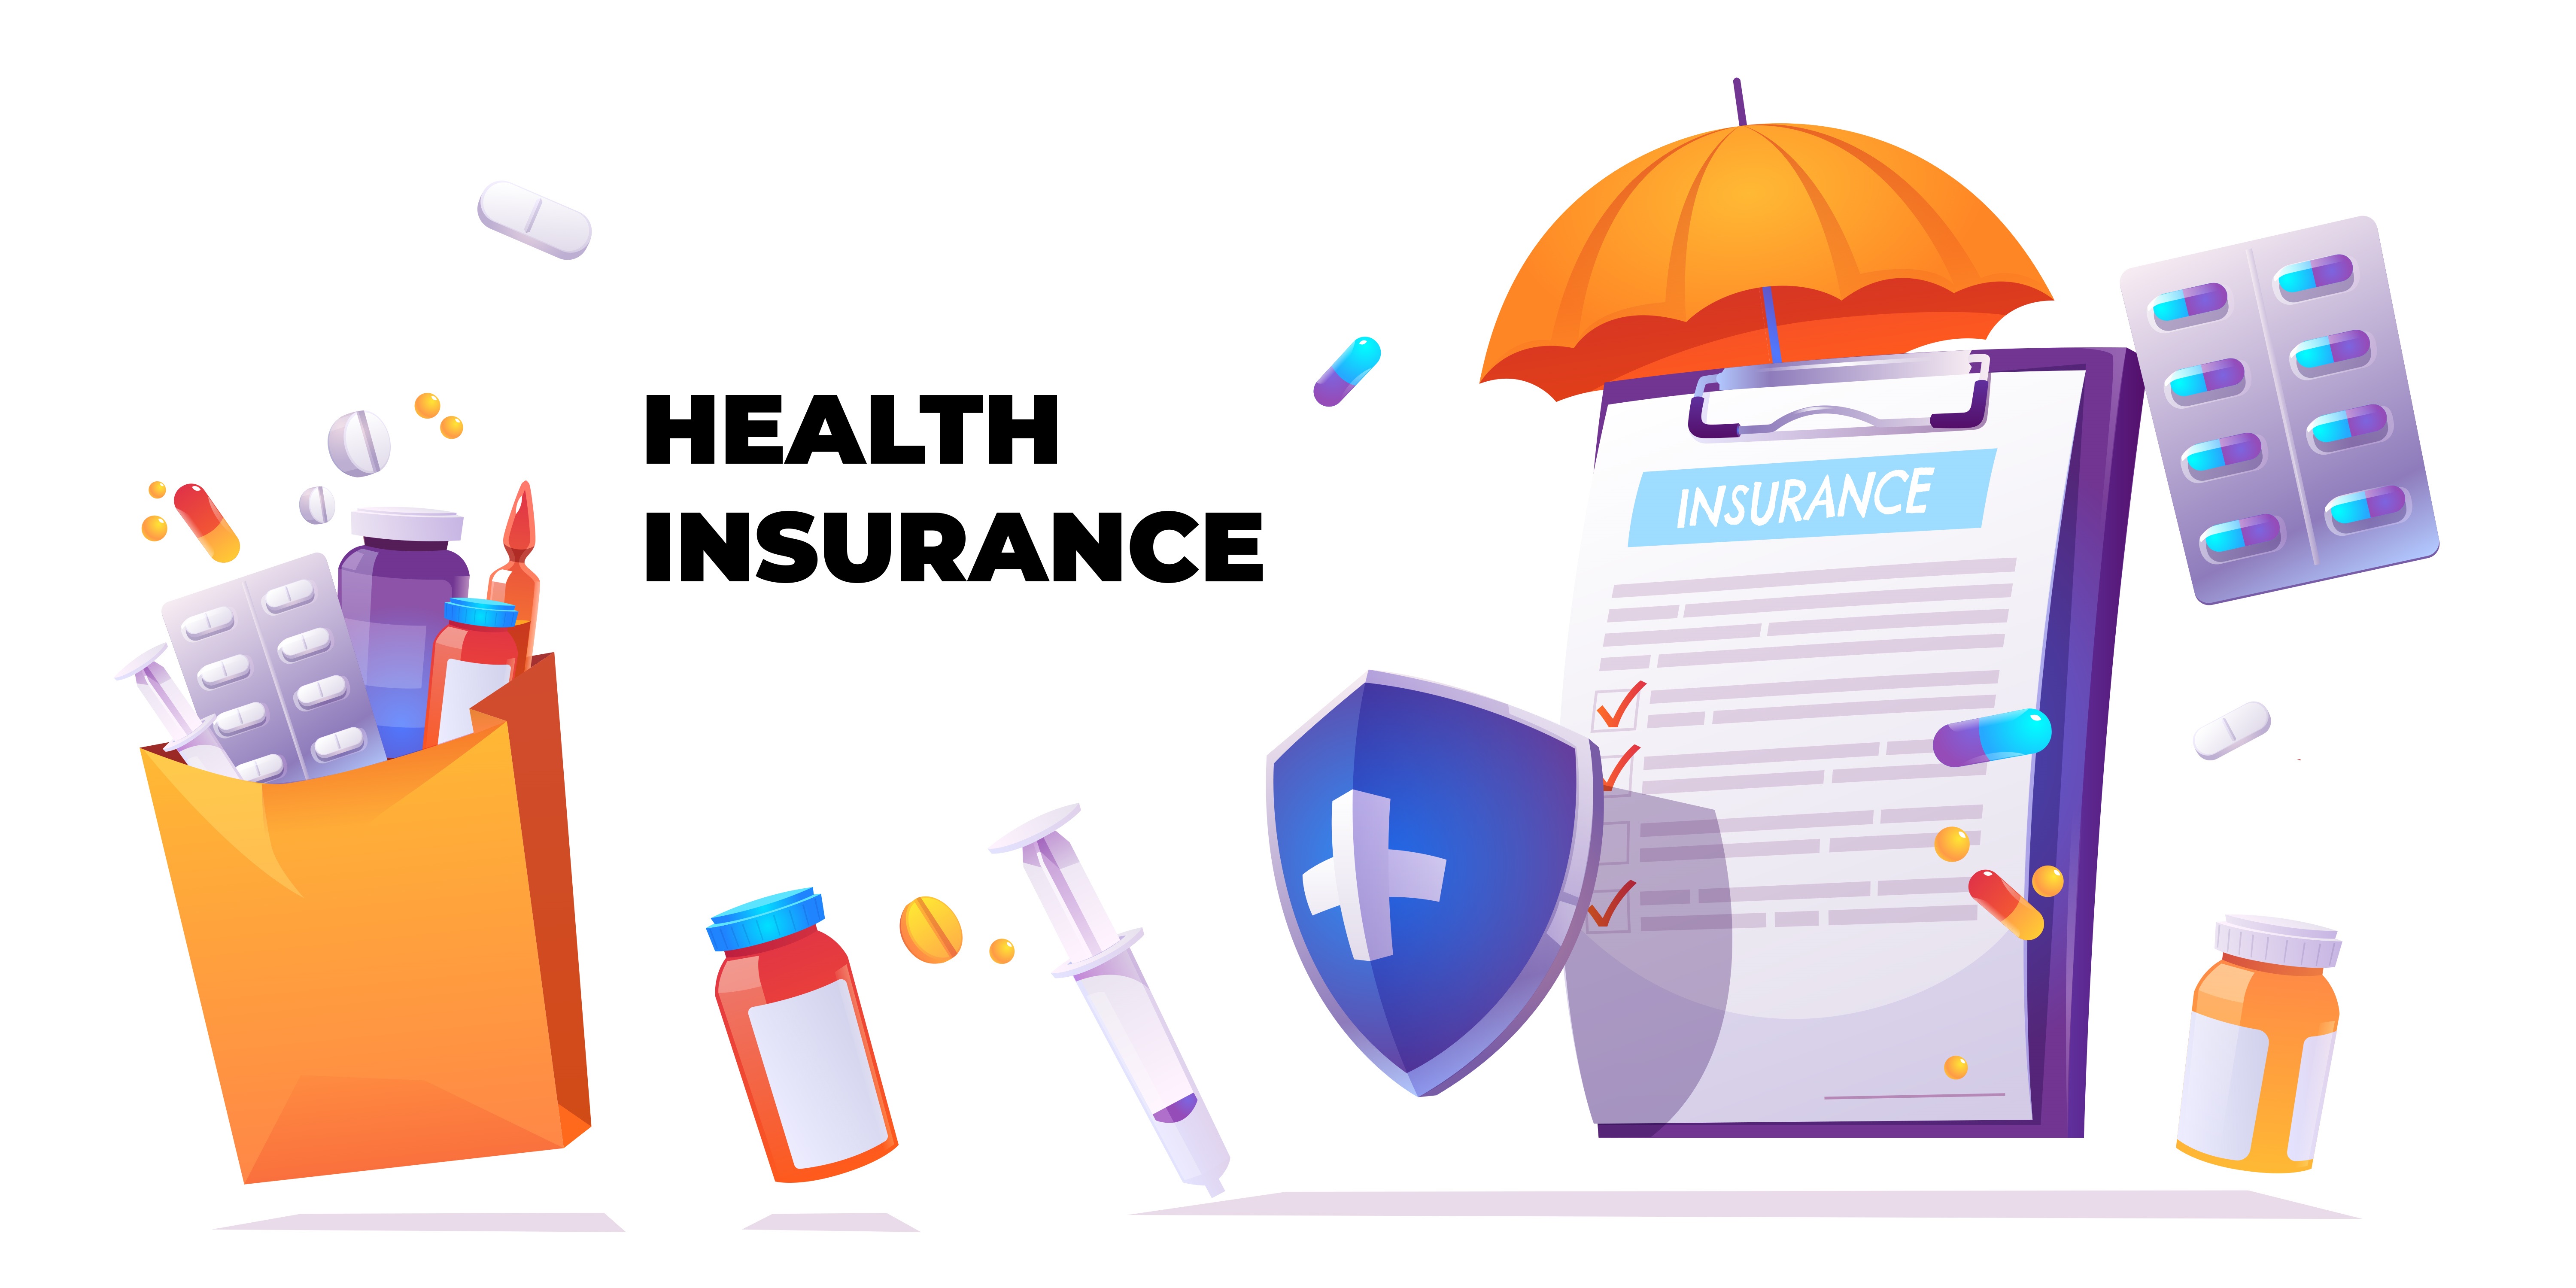 5 Things to Consider While Buying Health Insurance